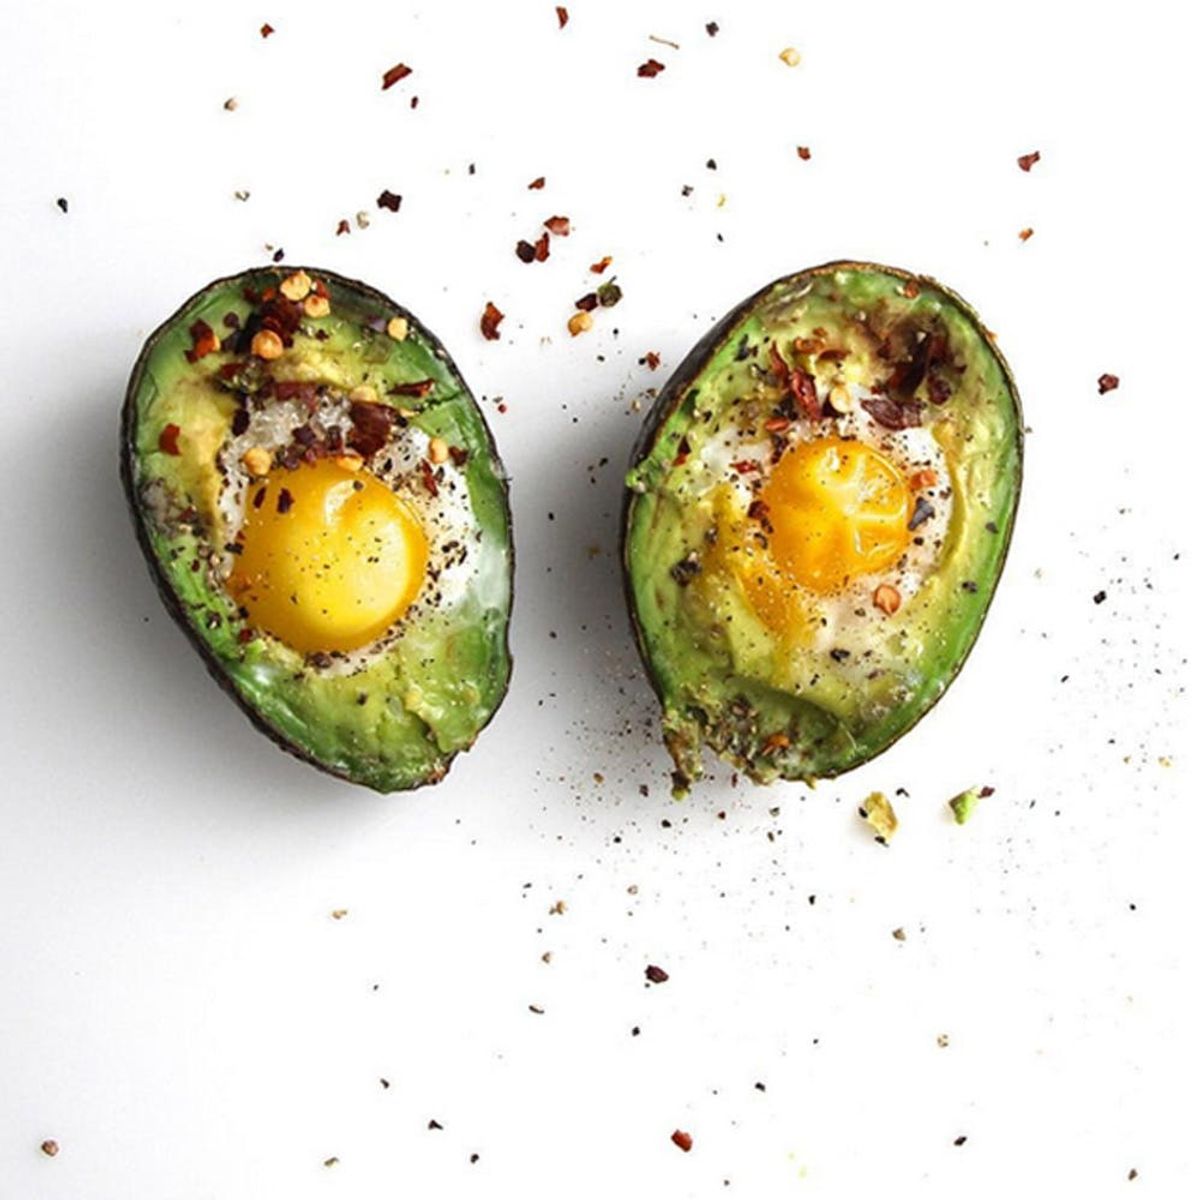 14 Quick + Easy Stuffed Avocado Recipes to Make As Your Summer Snack